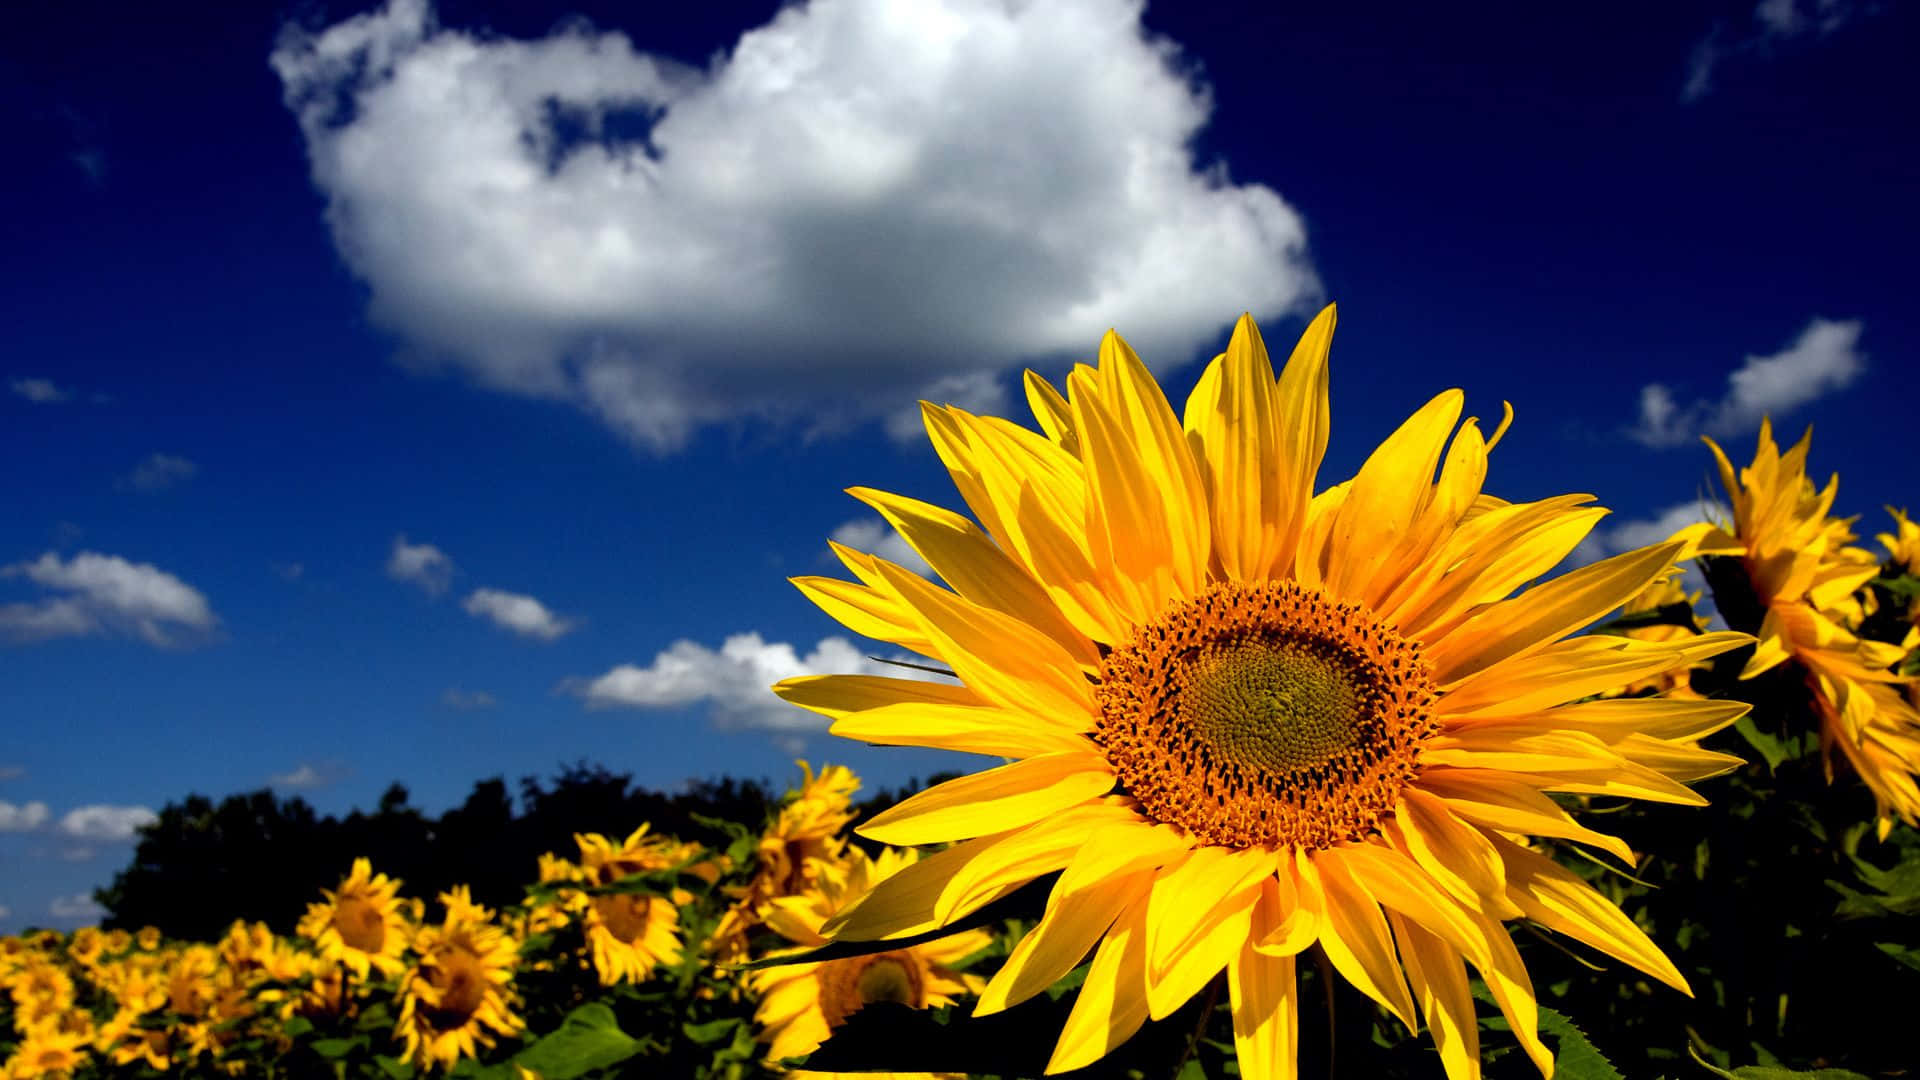 Blooming sunflowers with bright yellow petals in a field